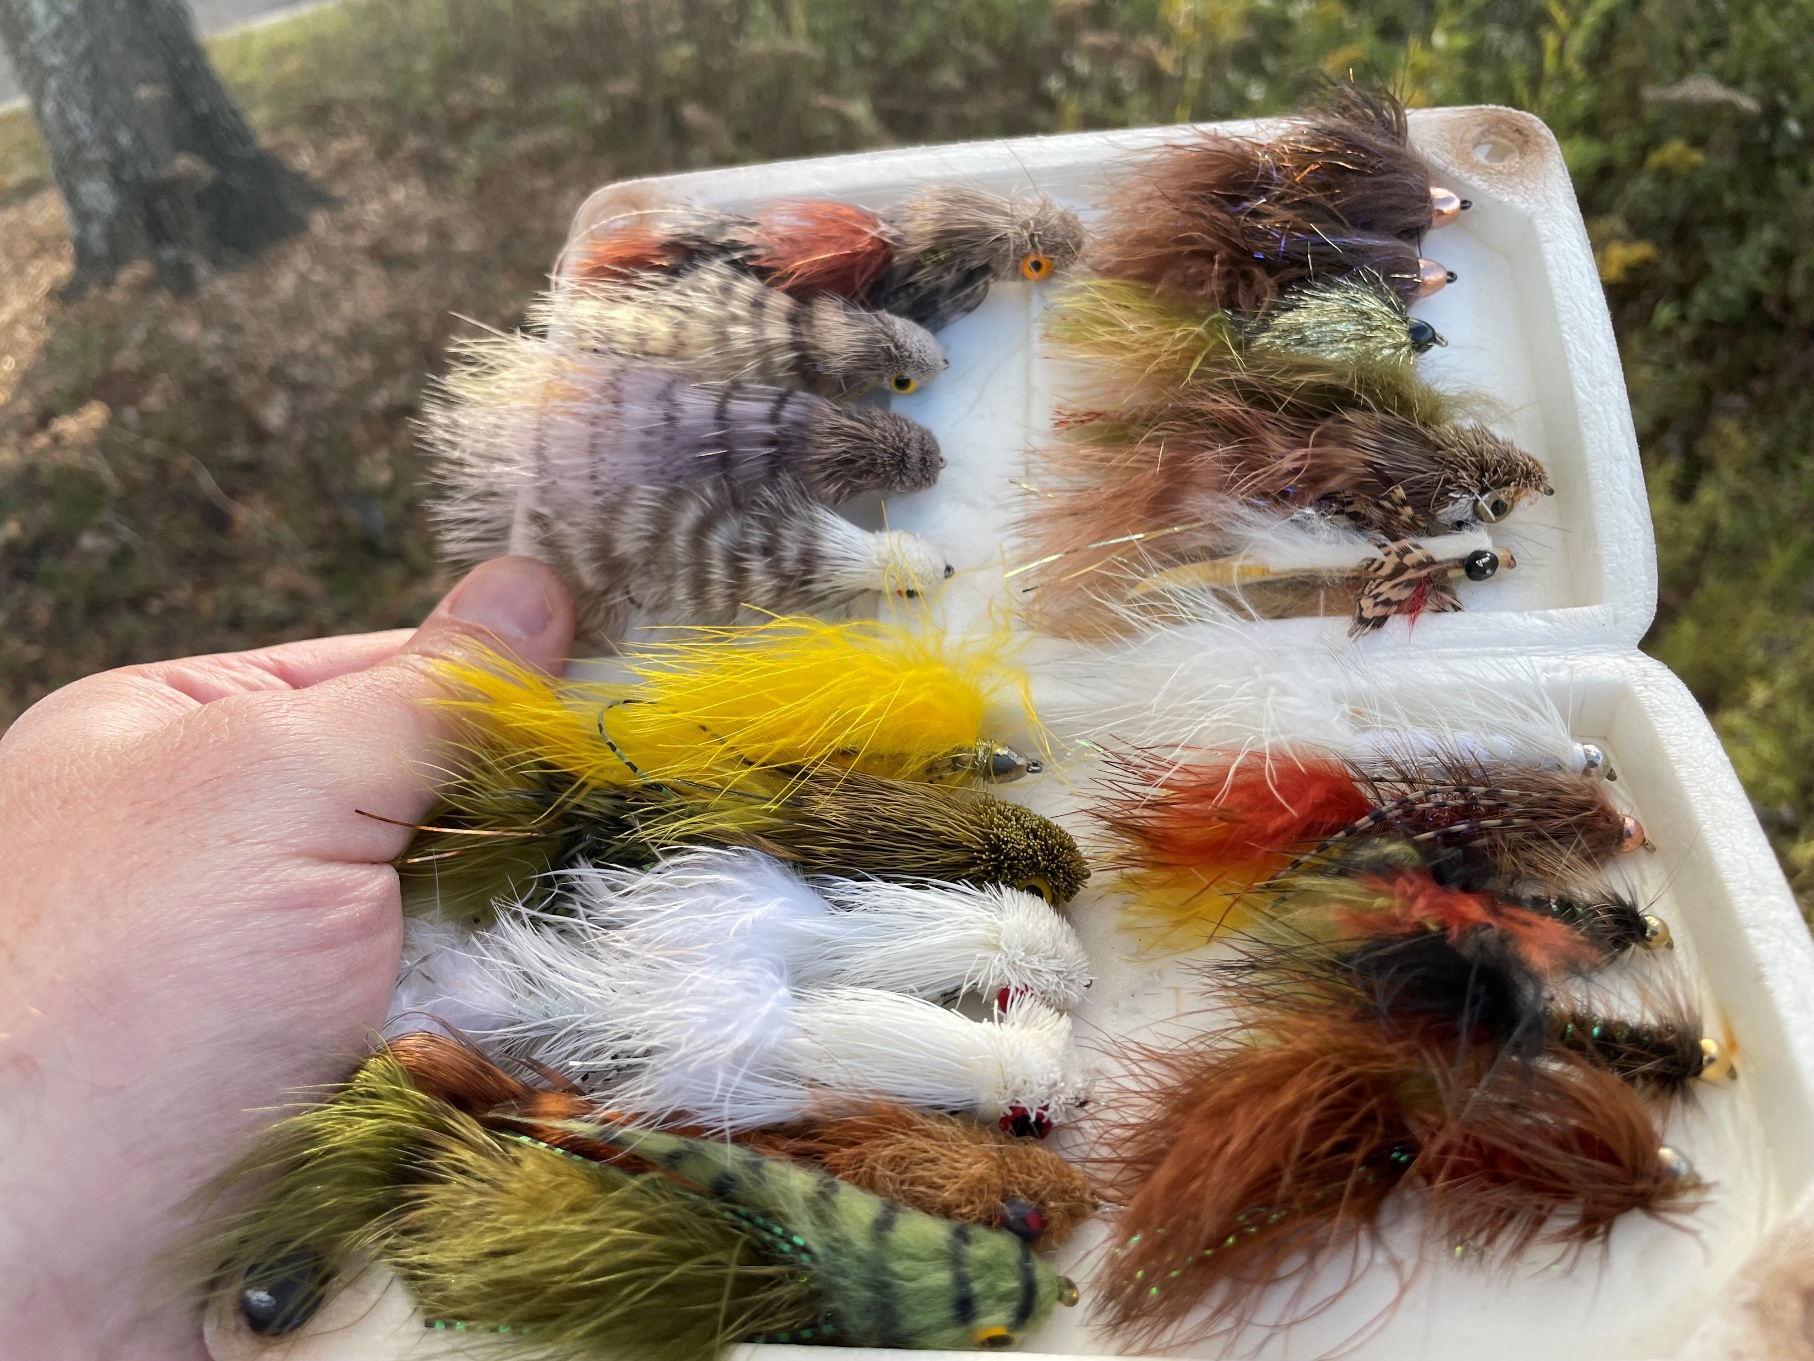 An image of a Styrofoam box holding various fishing flies of numerous colors with long feathery tails and small painted eyes.